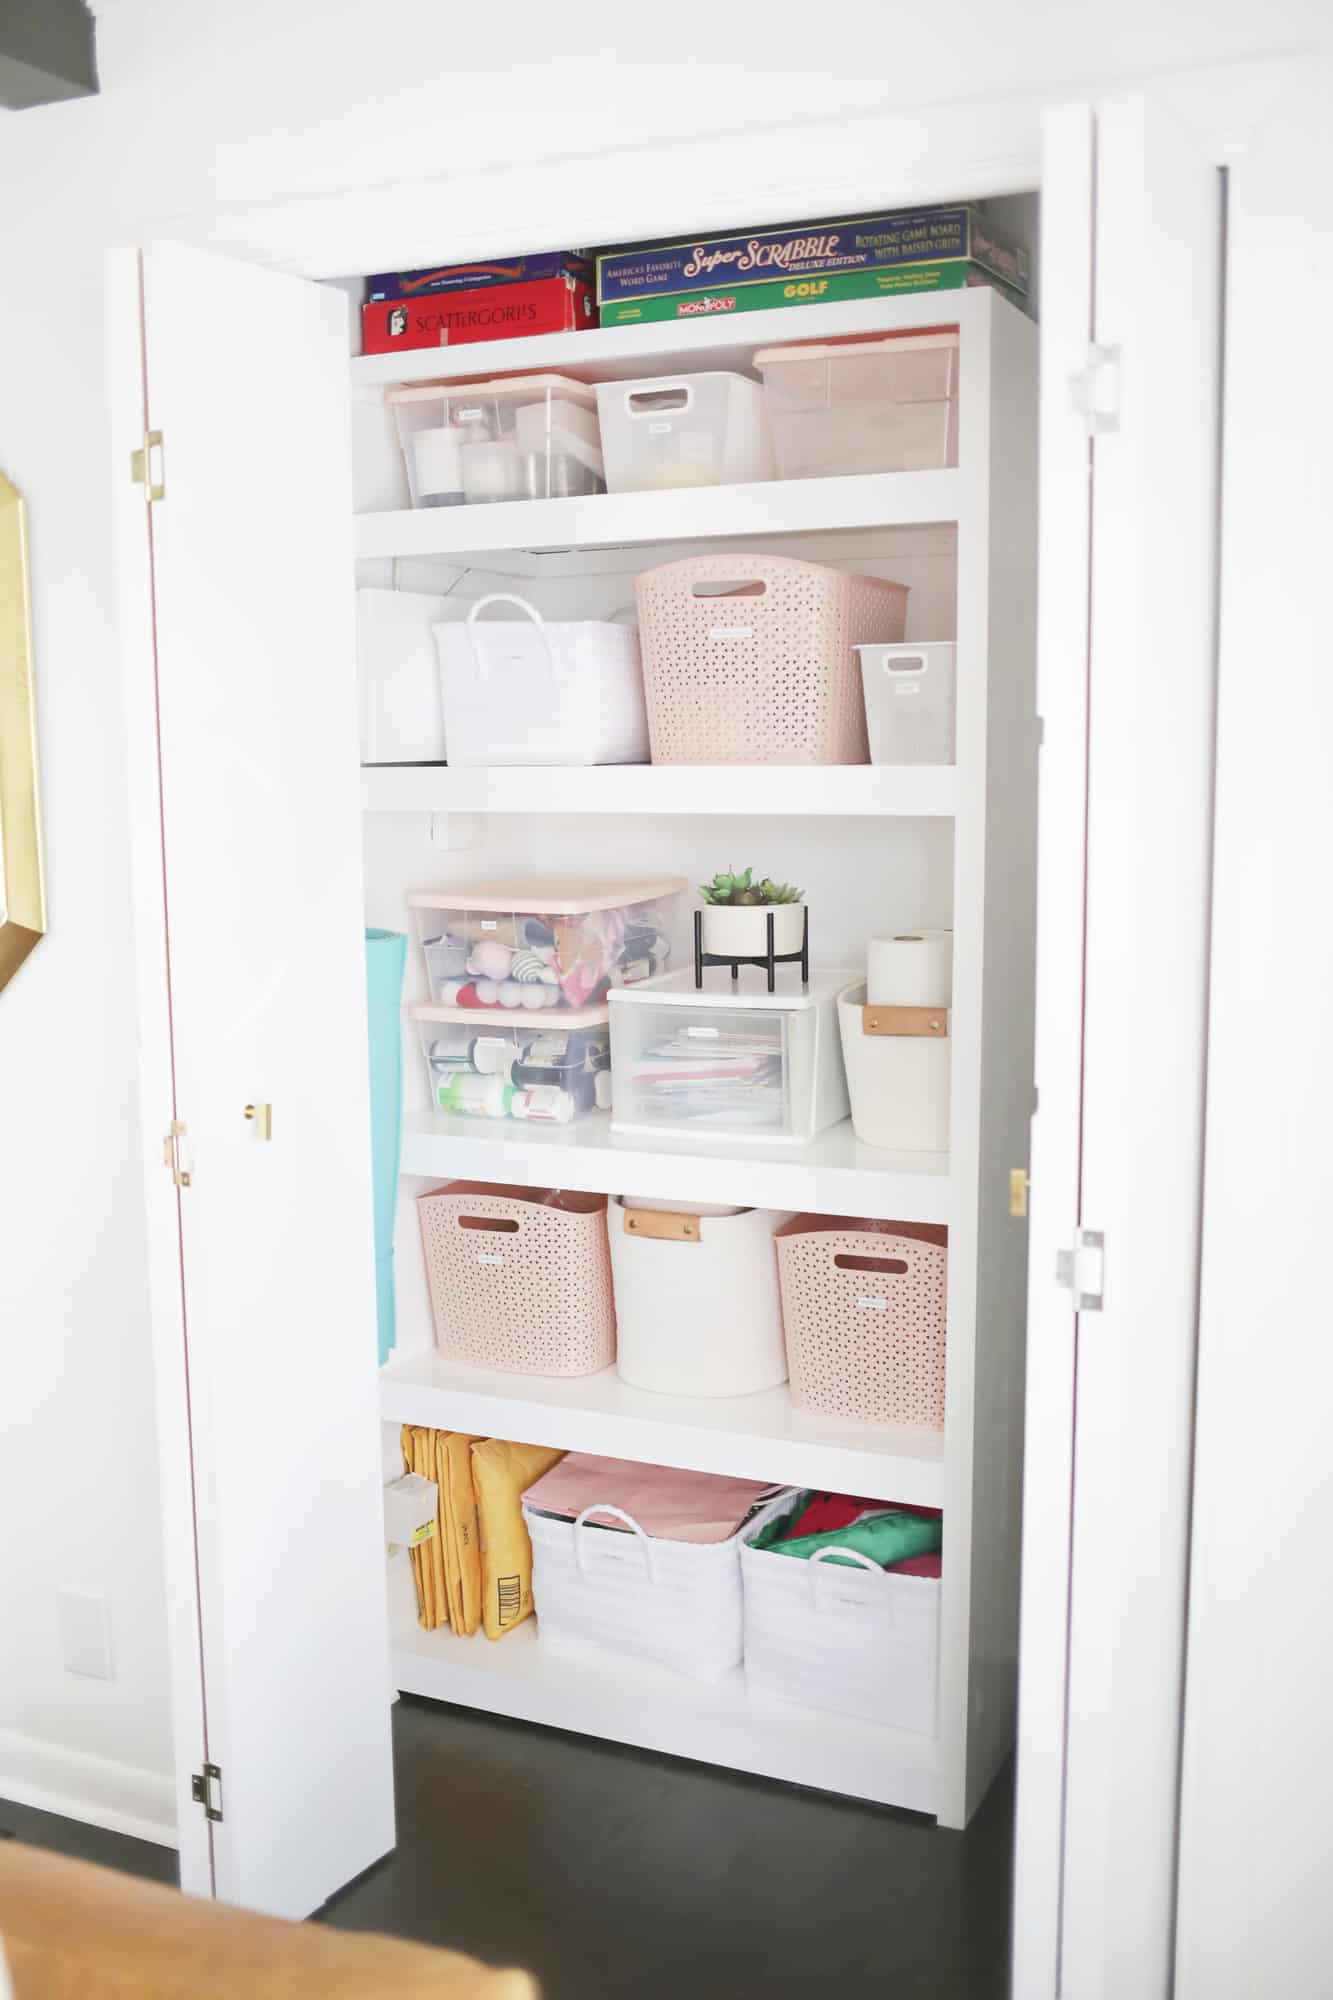 https://abeautifulmess.com/wp-content/uploads/2019/02/How-I-Organized-My-Hall-Closet-in-One-Afternoon-Click-through-for-tips-1-15.jpg